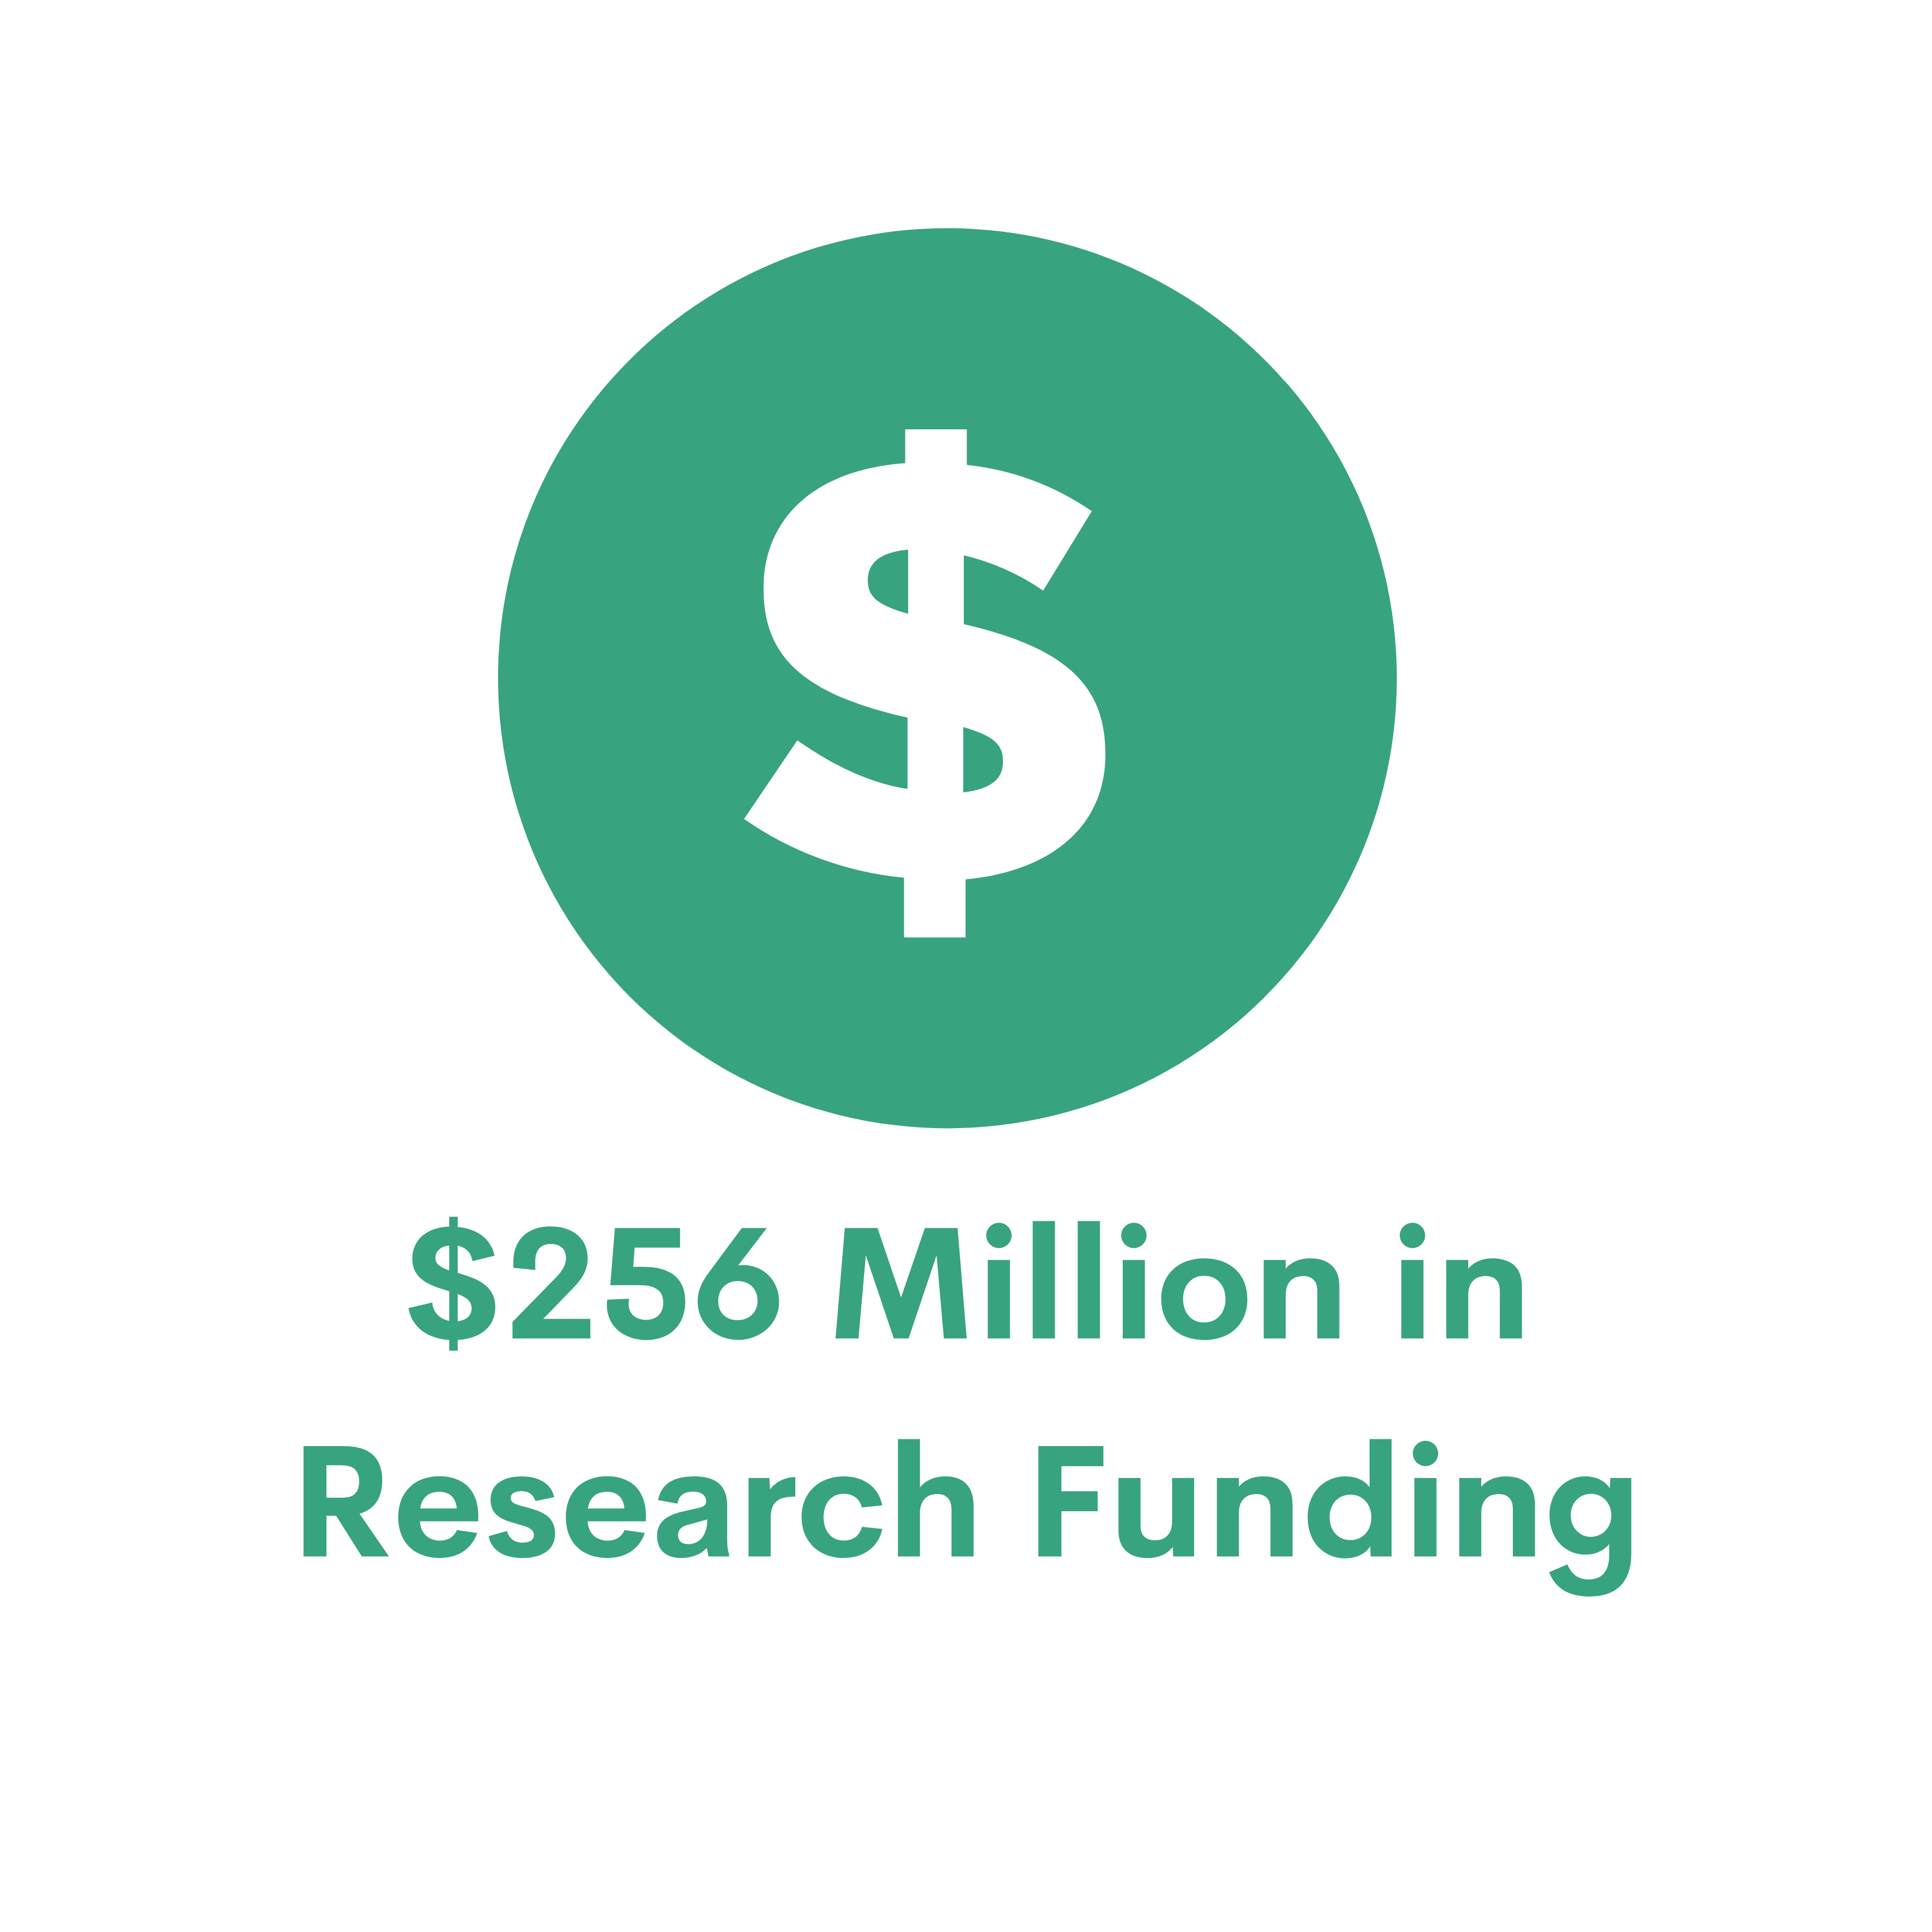 Research Funding